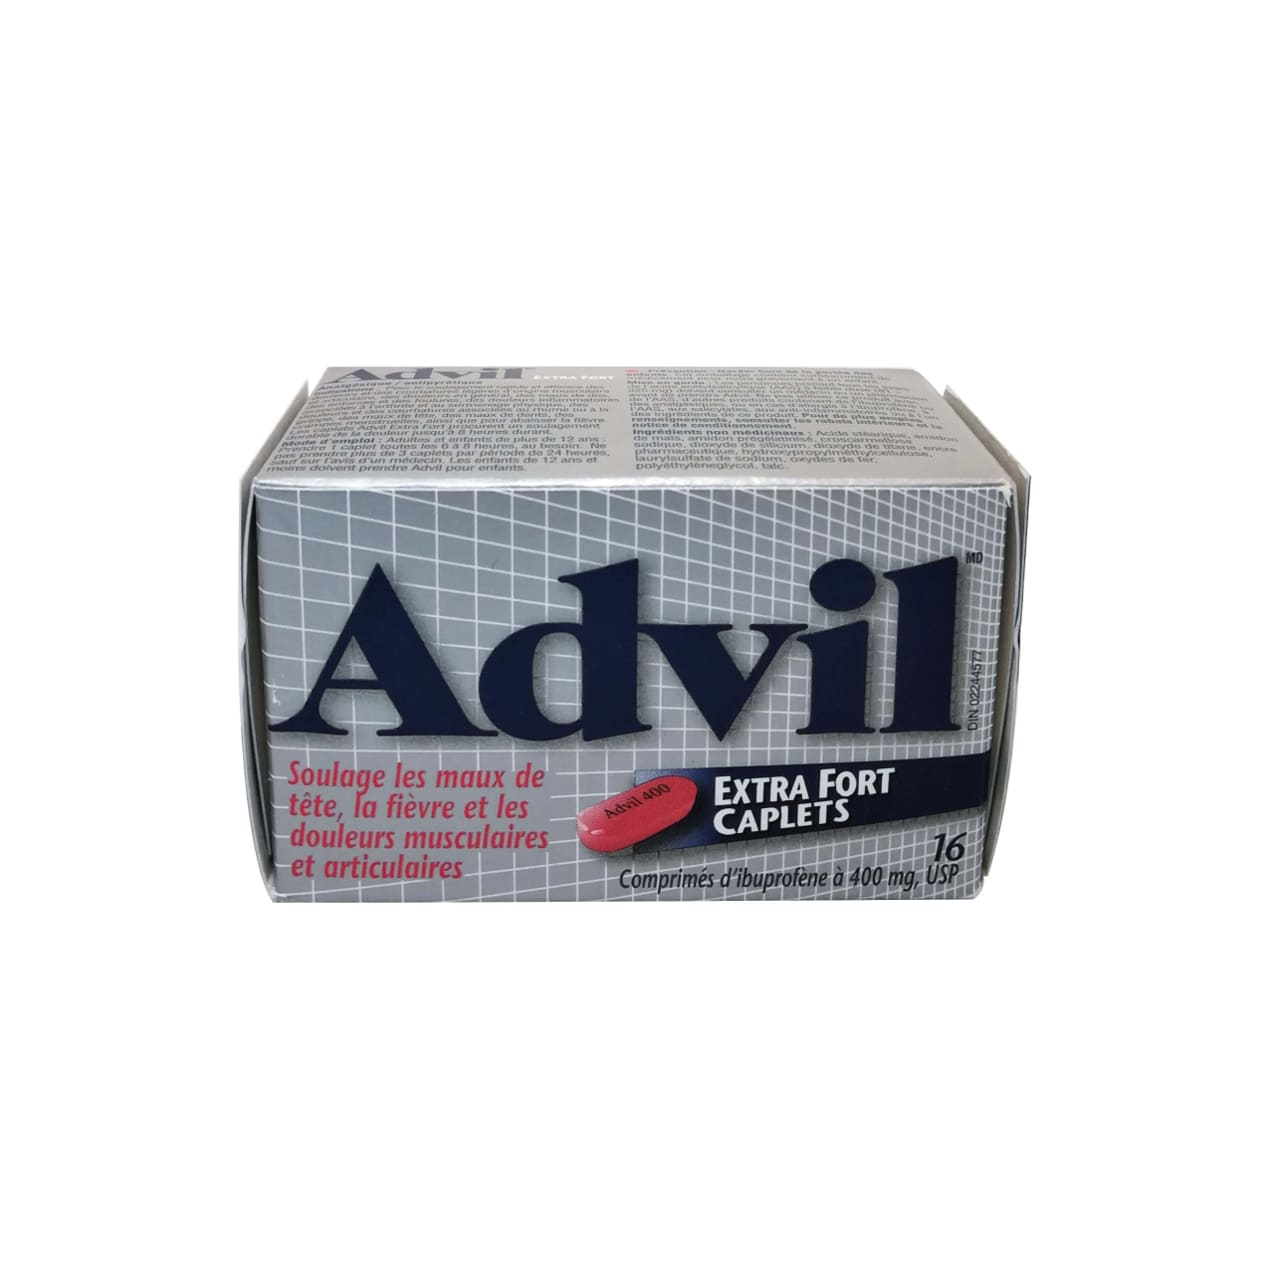 French label for Advil Extra Strength Ibuprofen 400mg Caplets